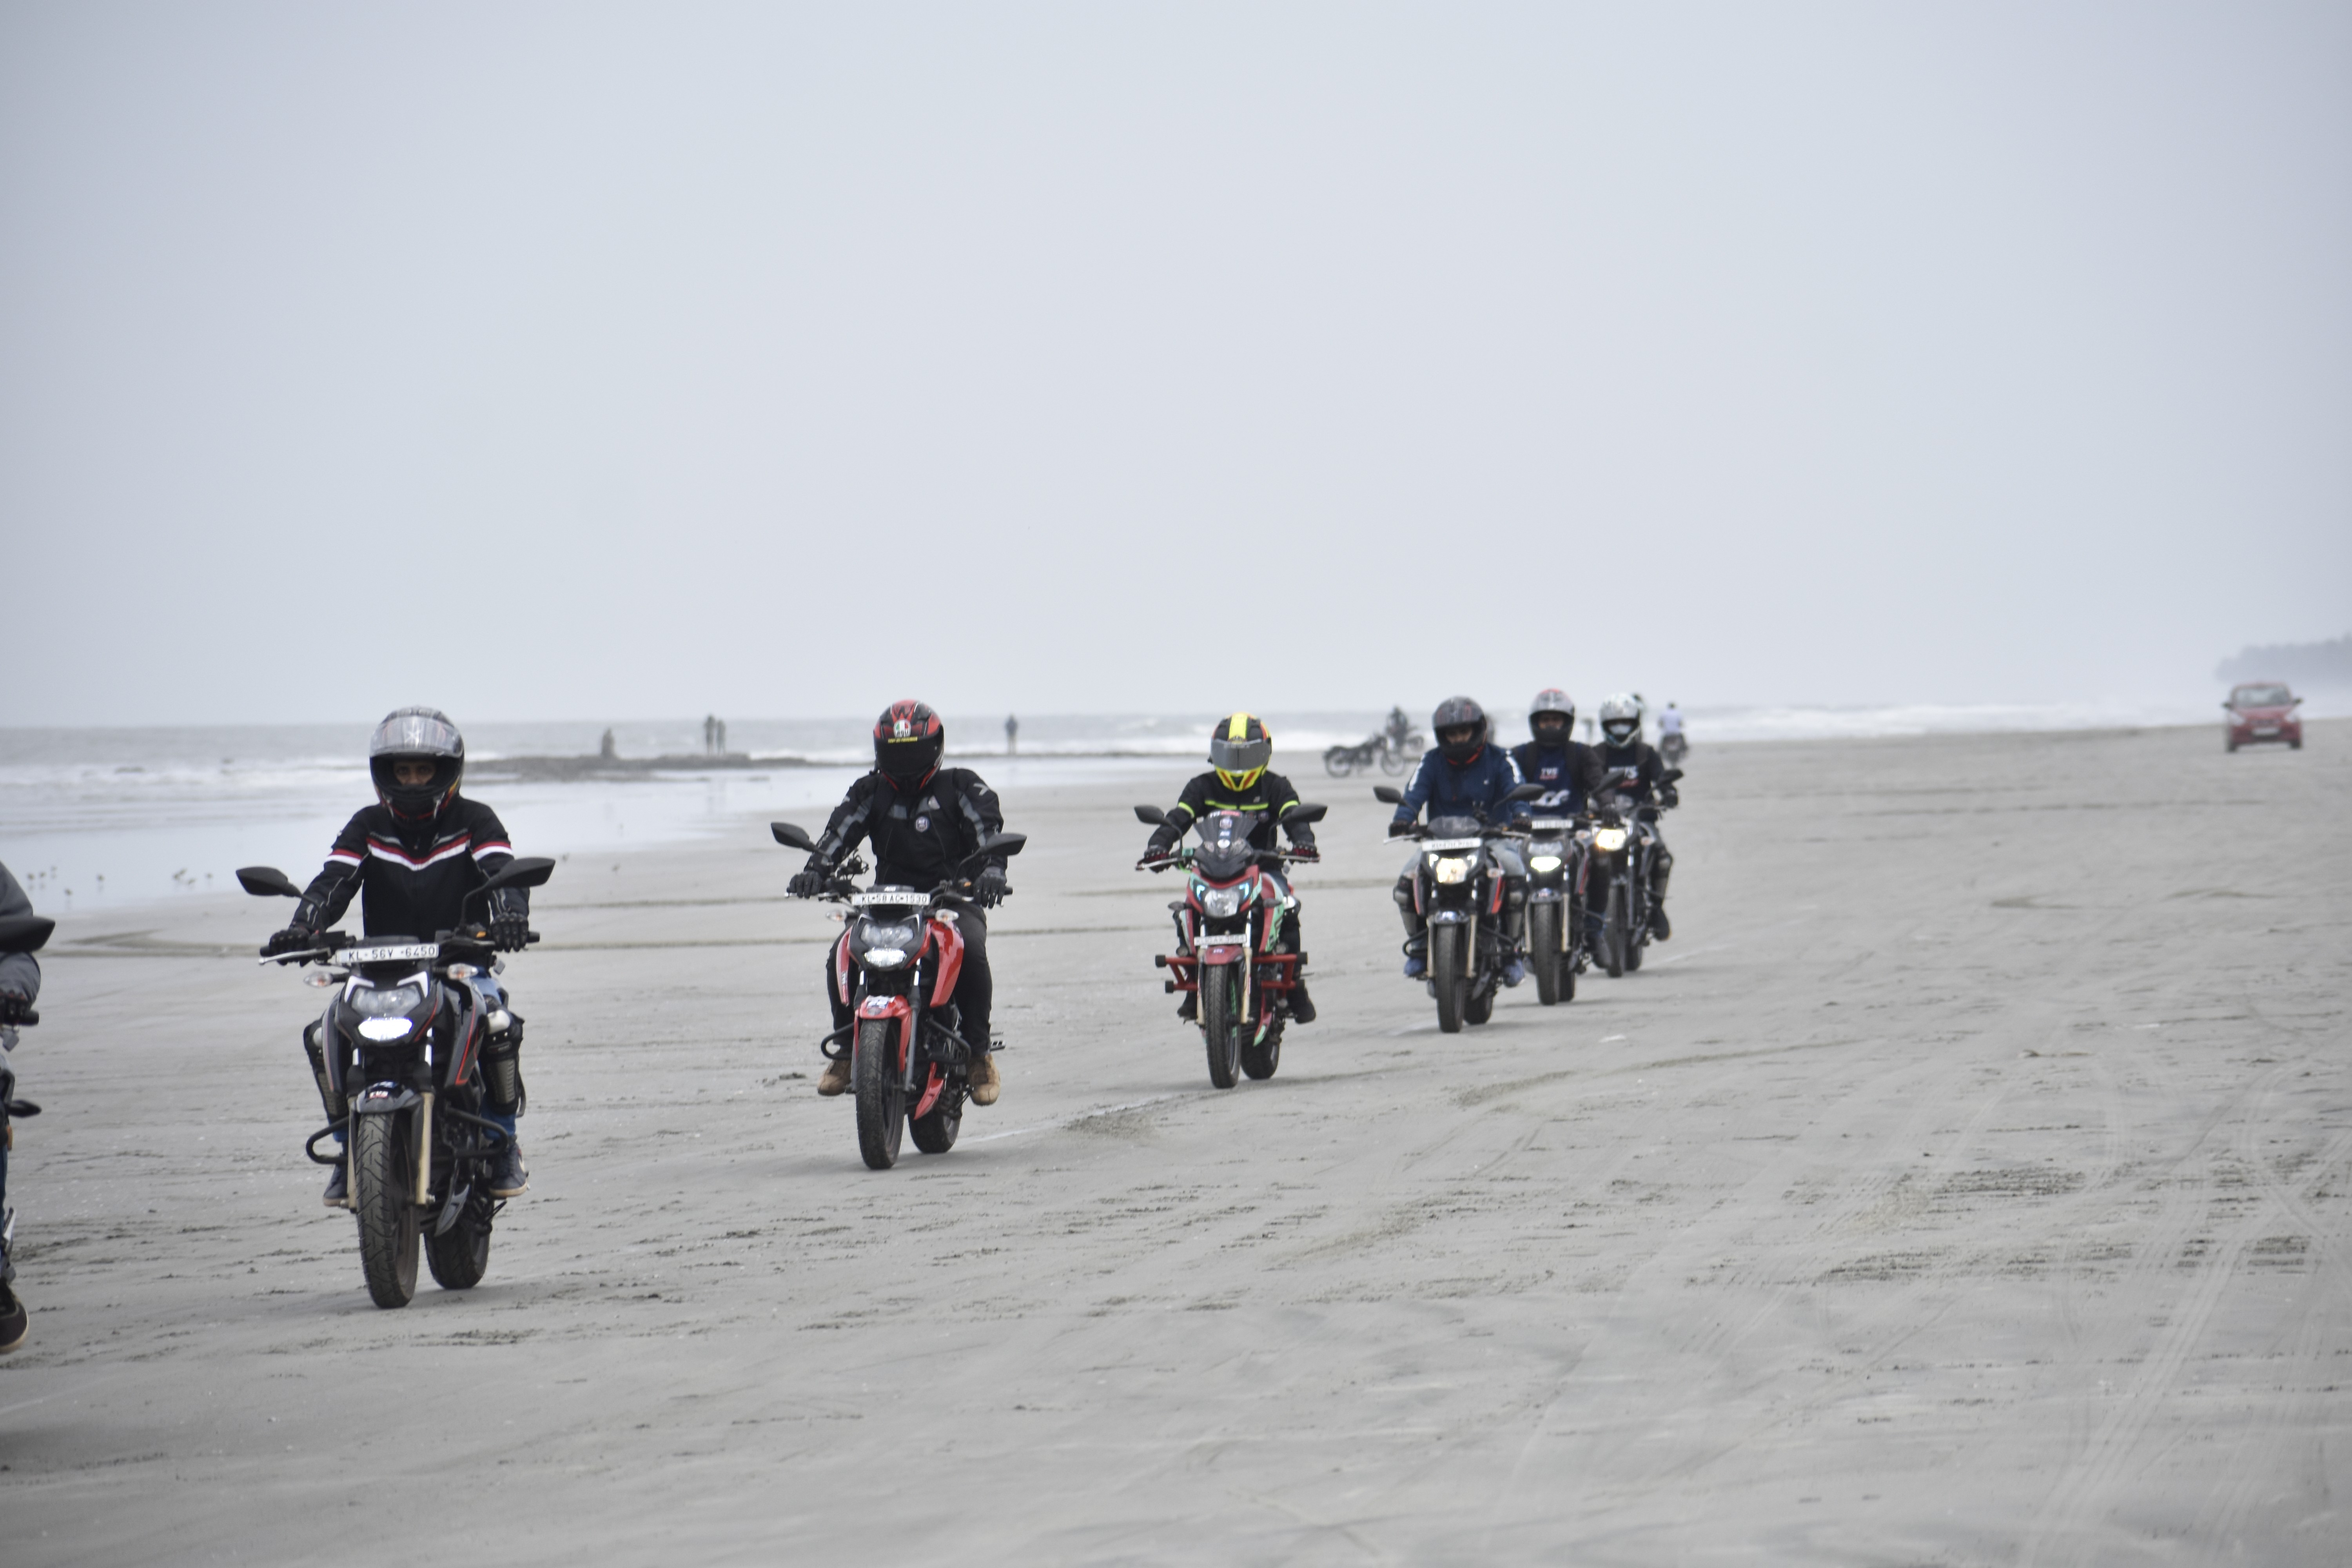 Five easy tips to maximize mileage on your motorcycle